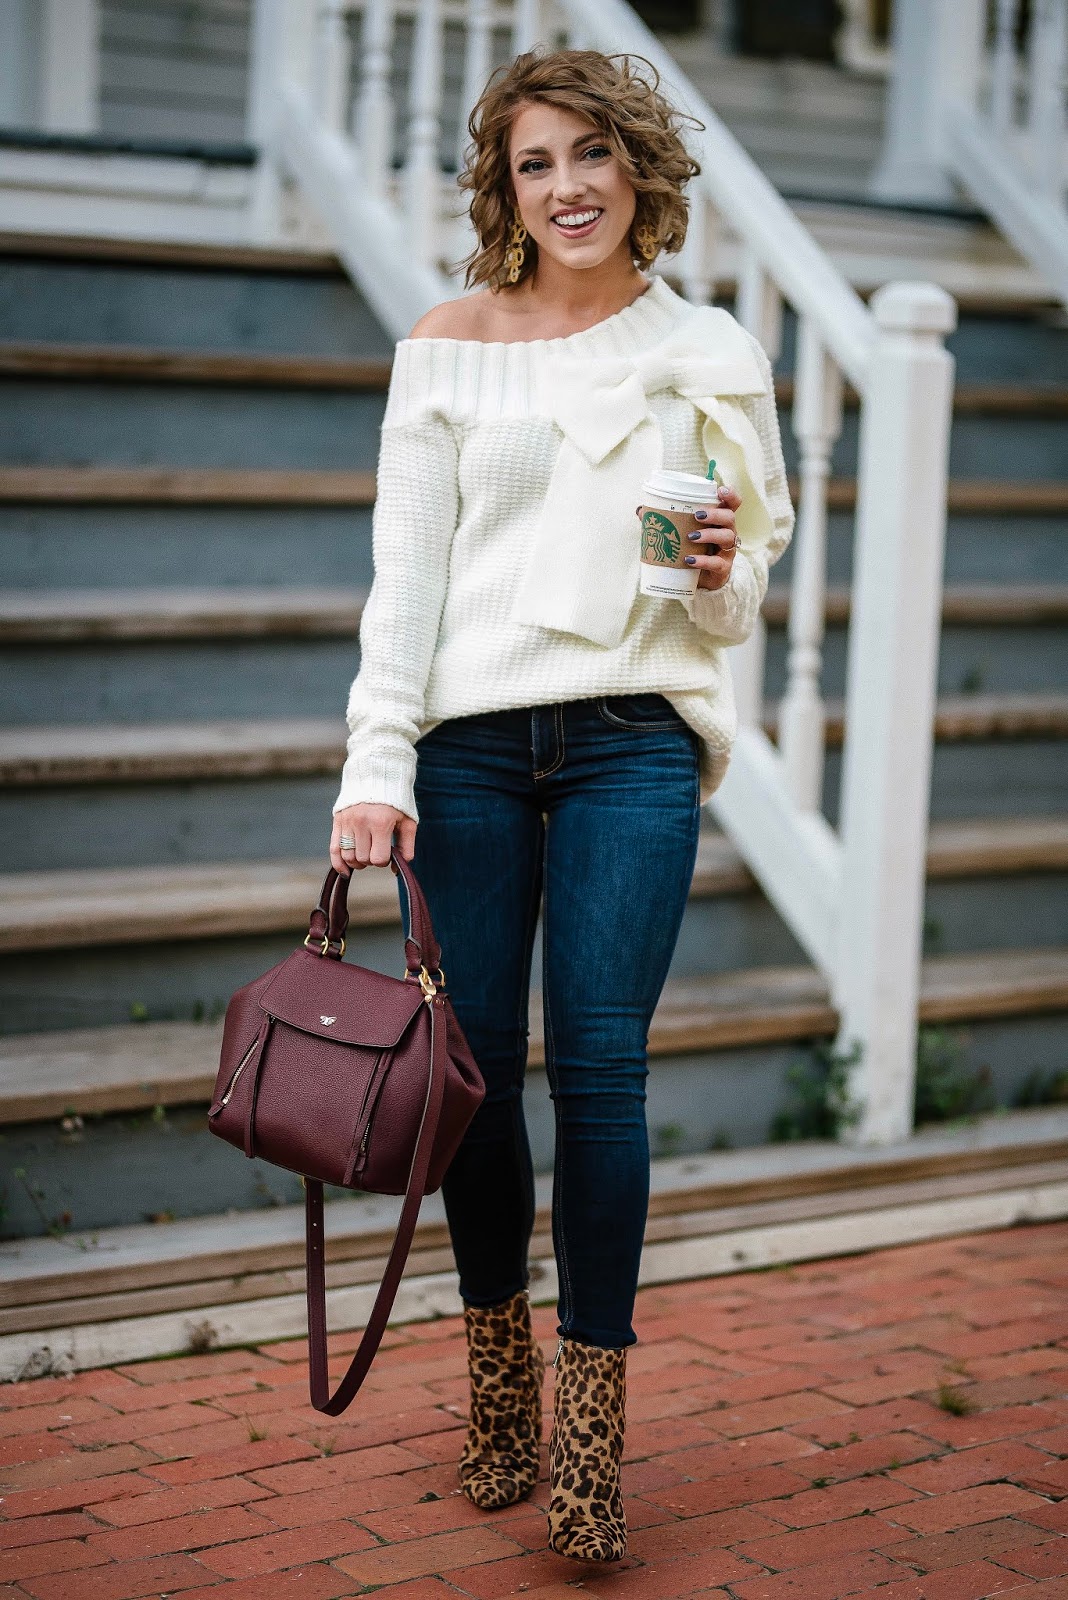 Fall Style: Under $100 Big Bow Sweater, Tory Burch Half Moon Satchel and Leopard Booties - Something Delightful Blog